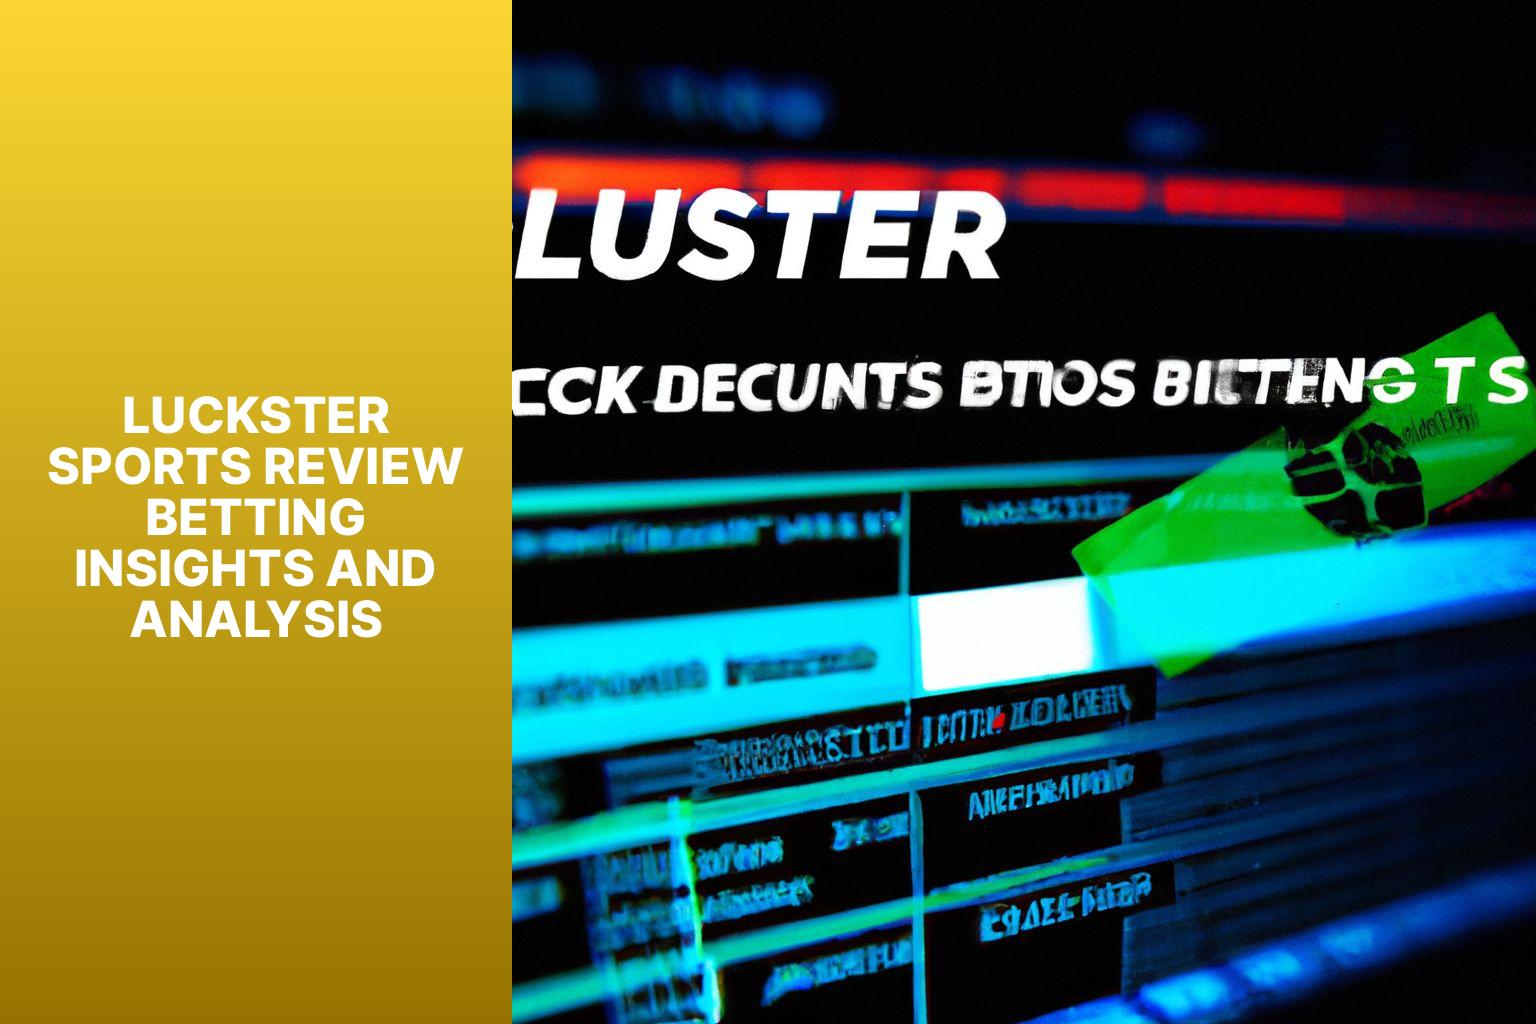 Luckster Sports Review Betting Insights and Analysis